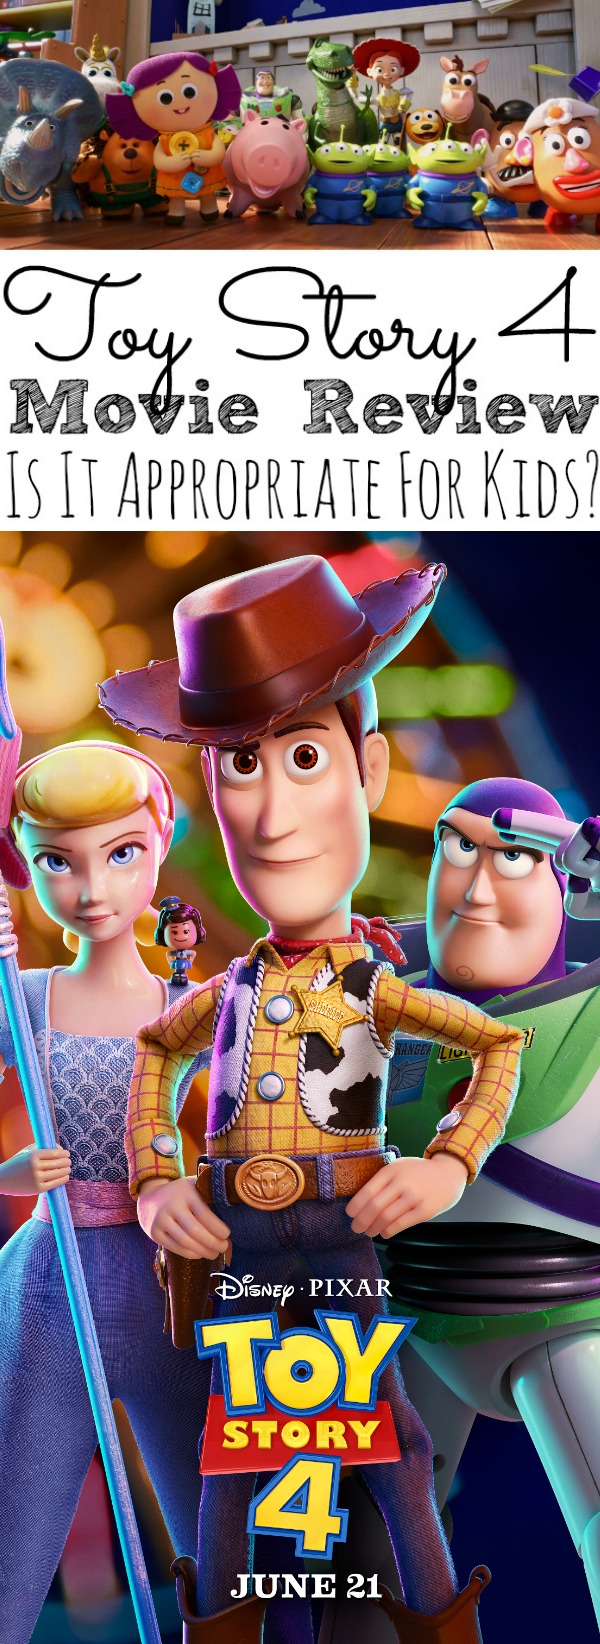 Parents Guide to Toy Story 4 Movie Review 